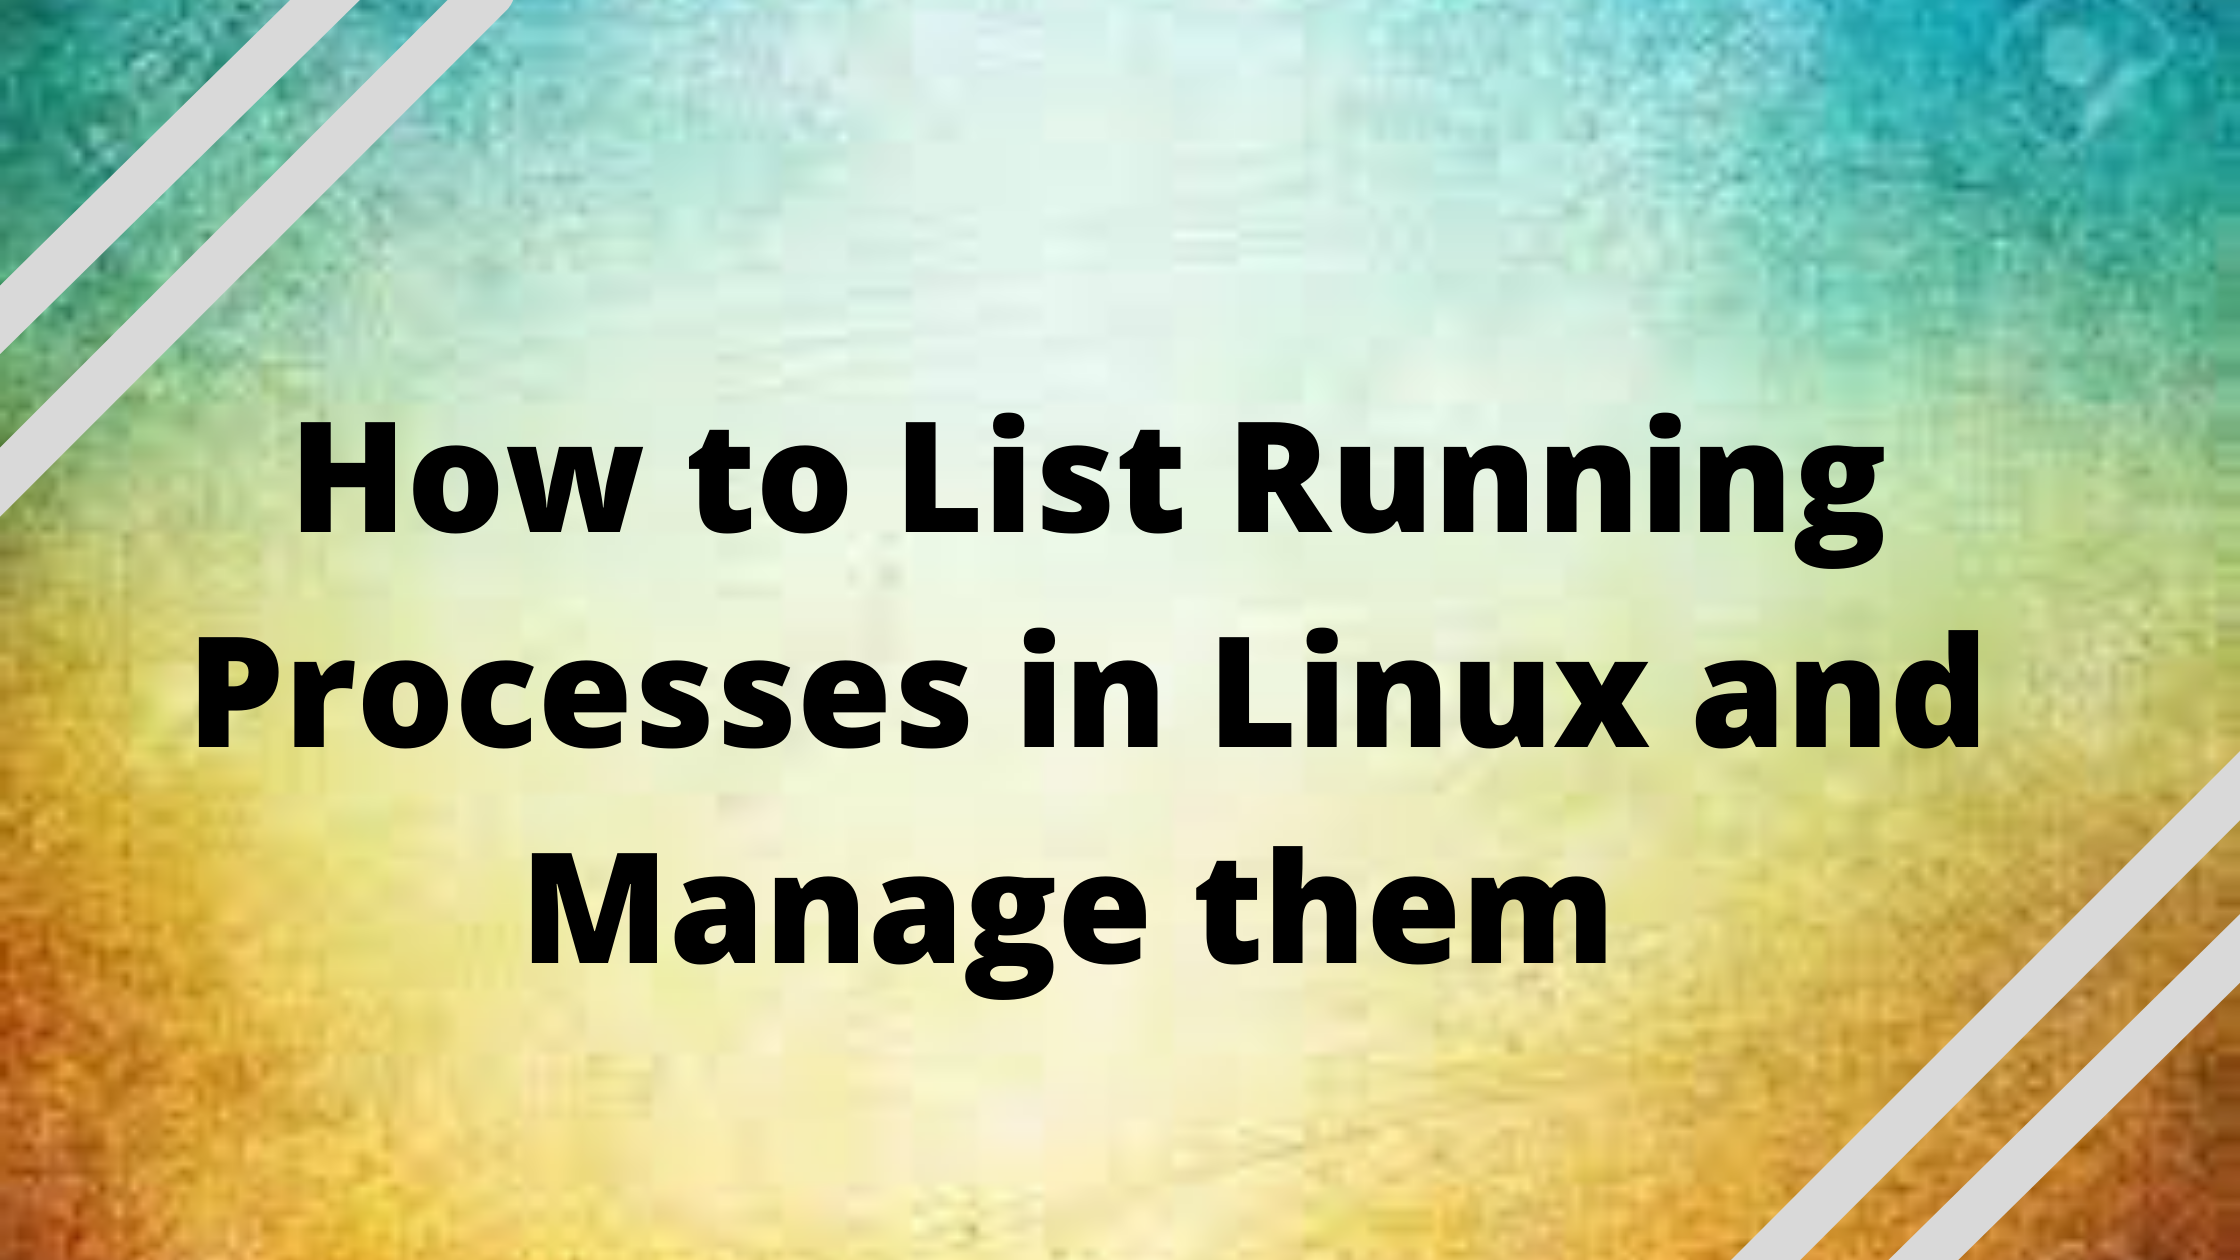 Processes in Linux